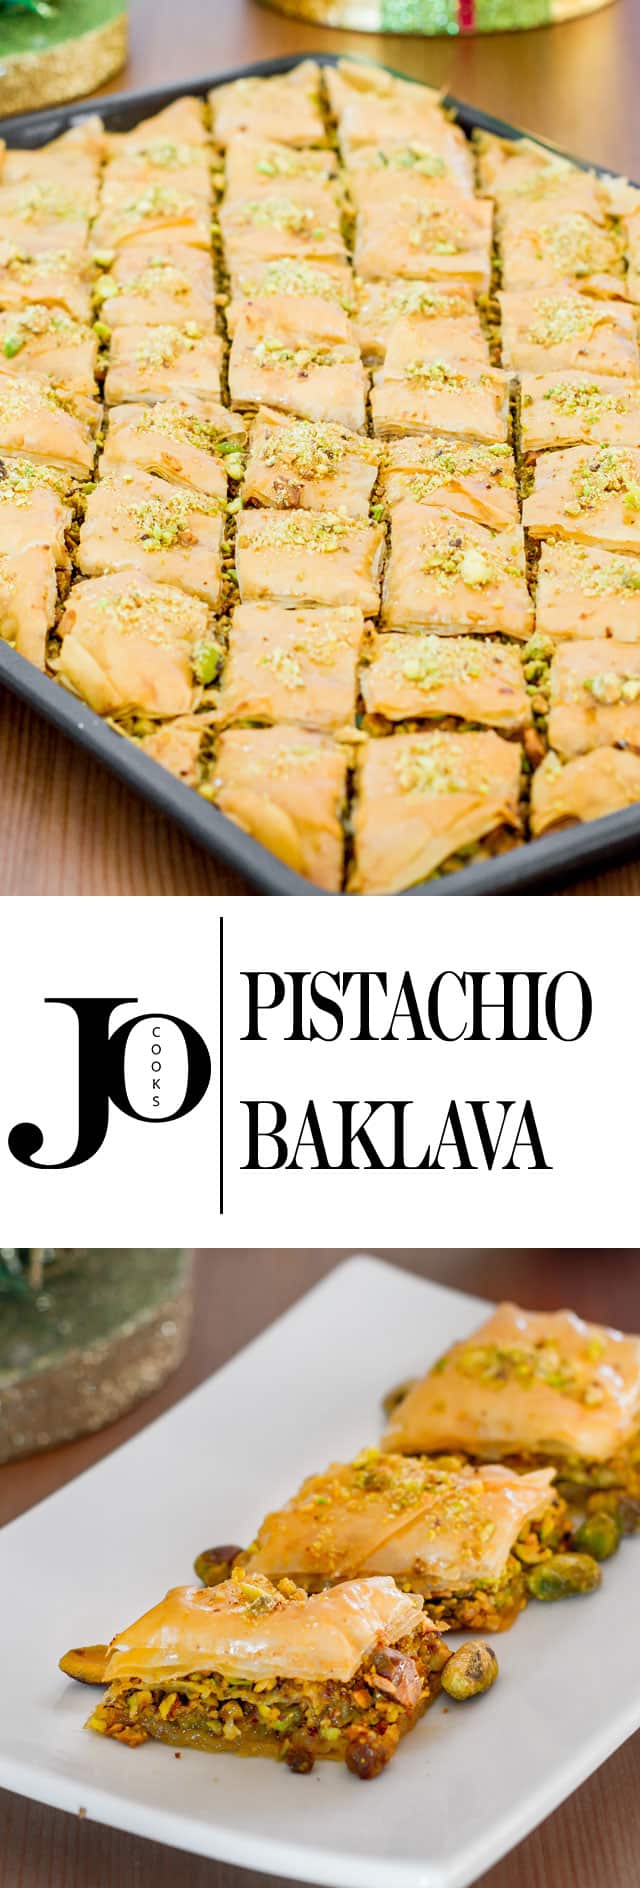 Pistachio Baklava pastry recipe, layers of phyllo dough filled with honey and loads of pistachios.